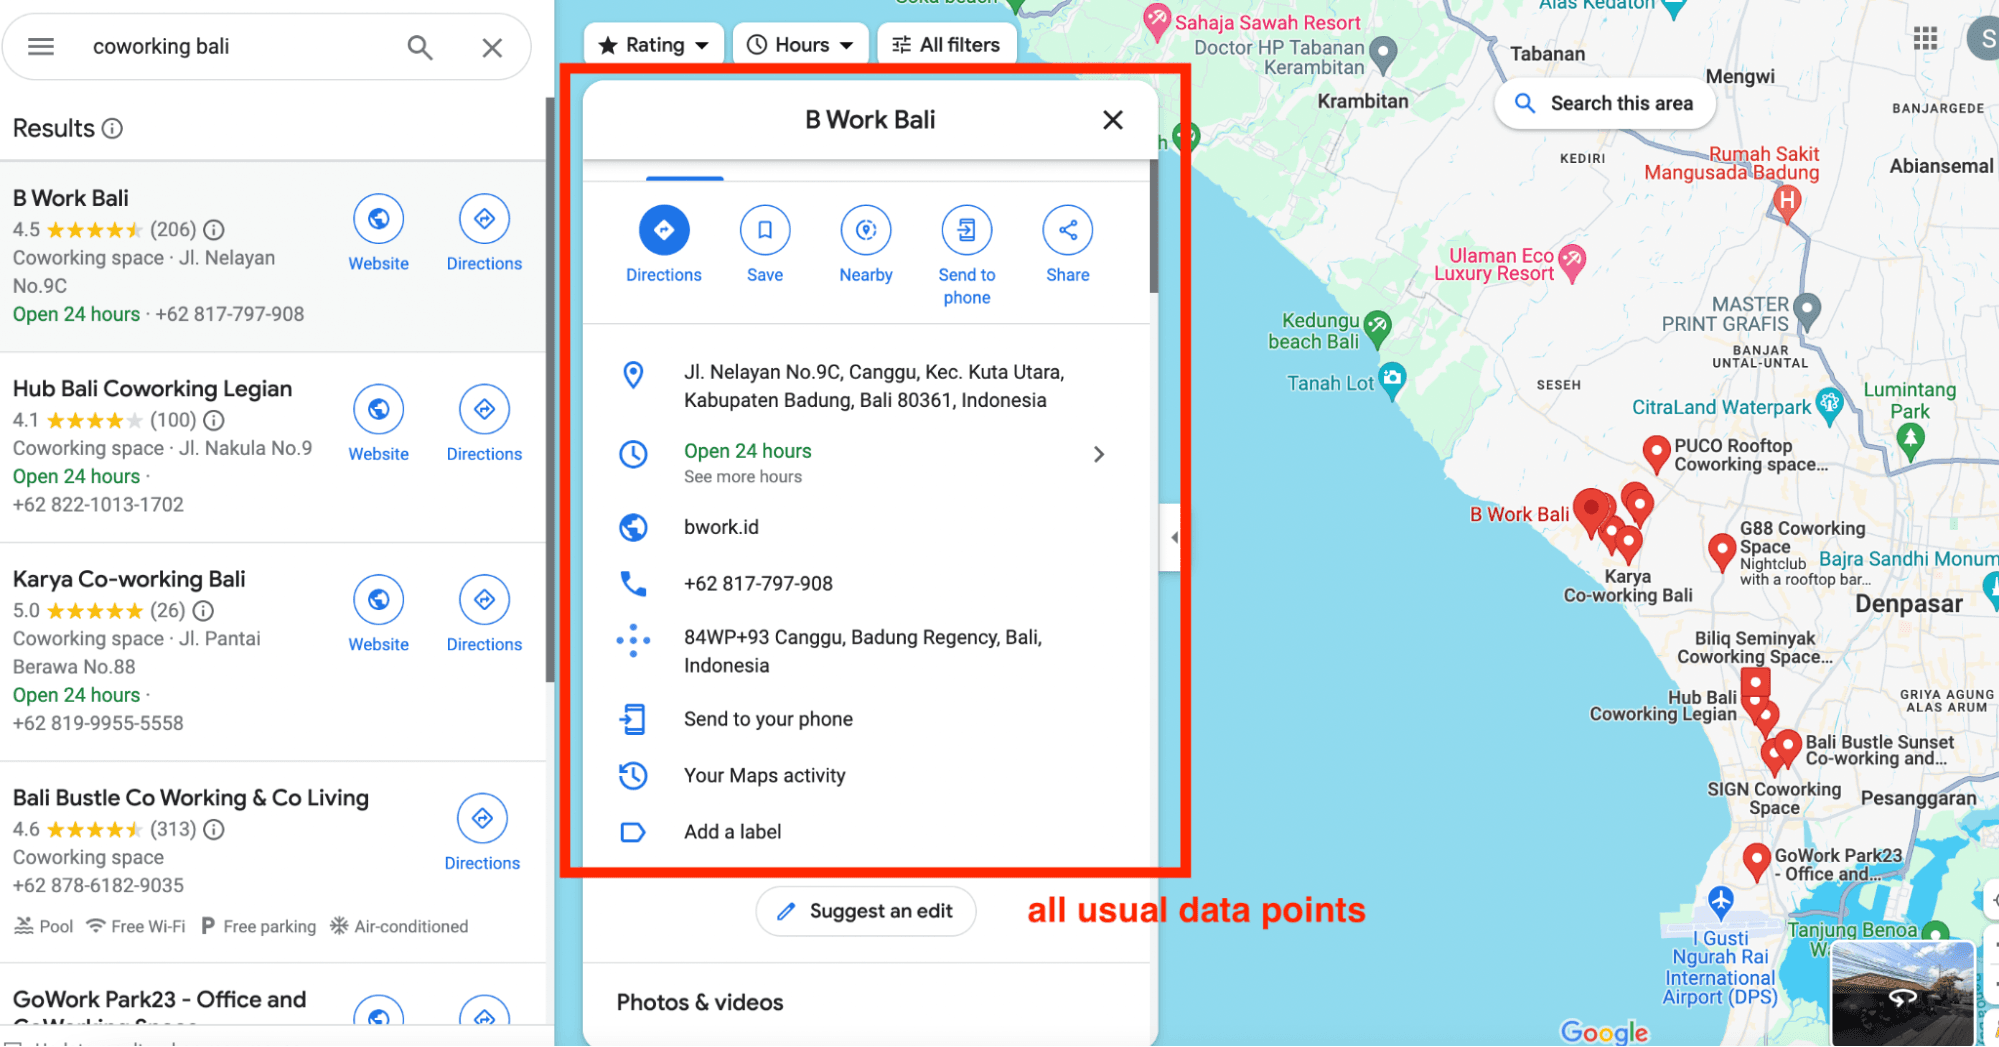 usual datapoints google maps - image28.png